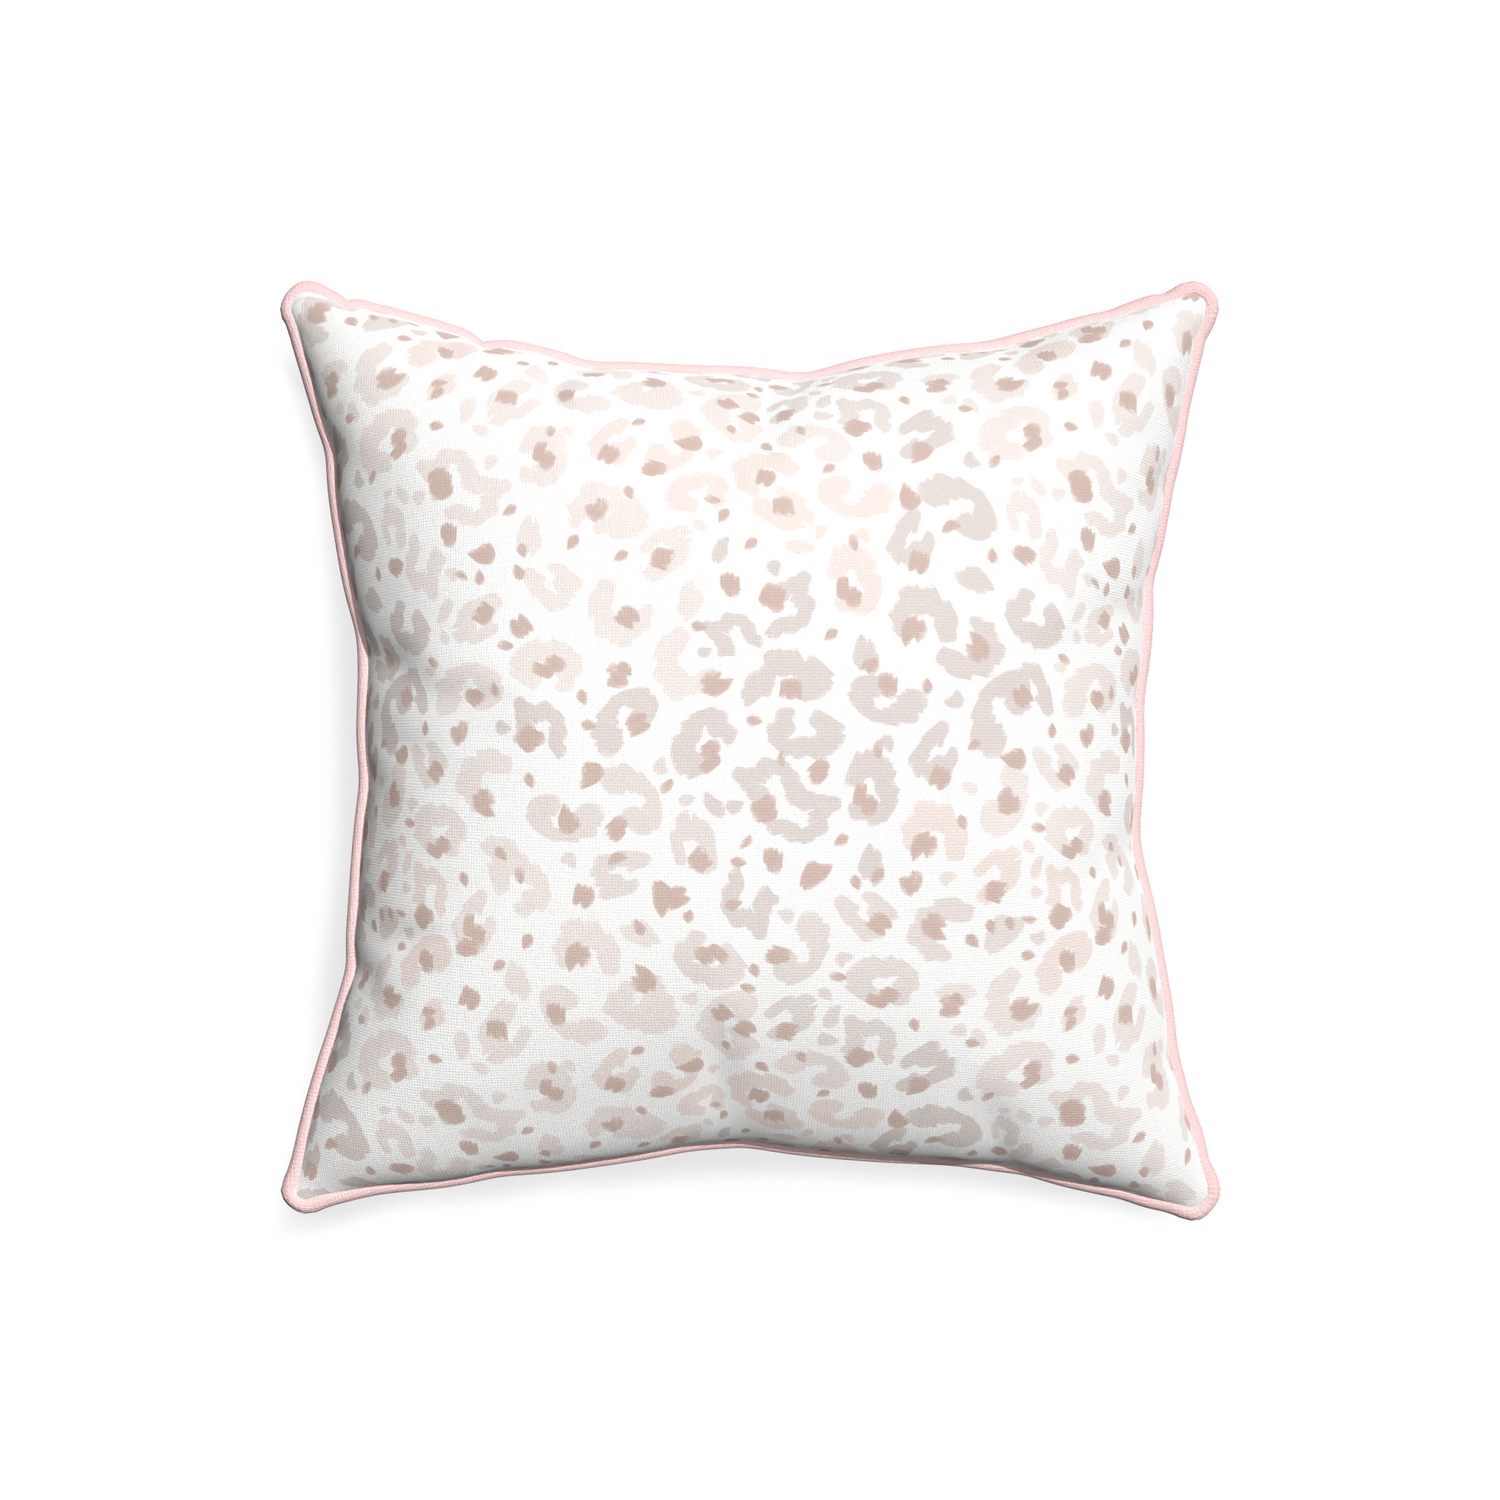 20-square rosie custom pillow with petal piping on white background